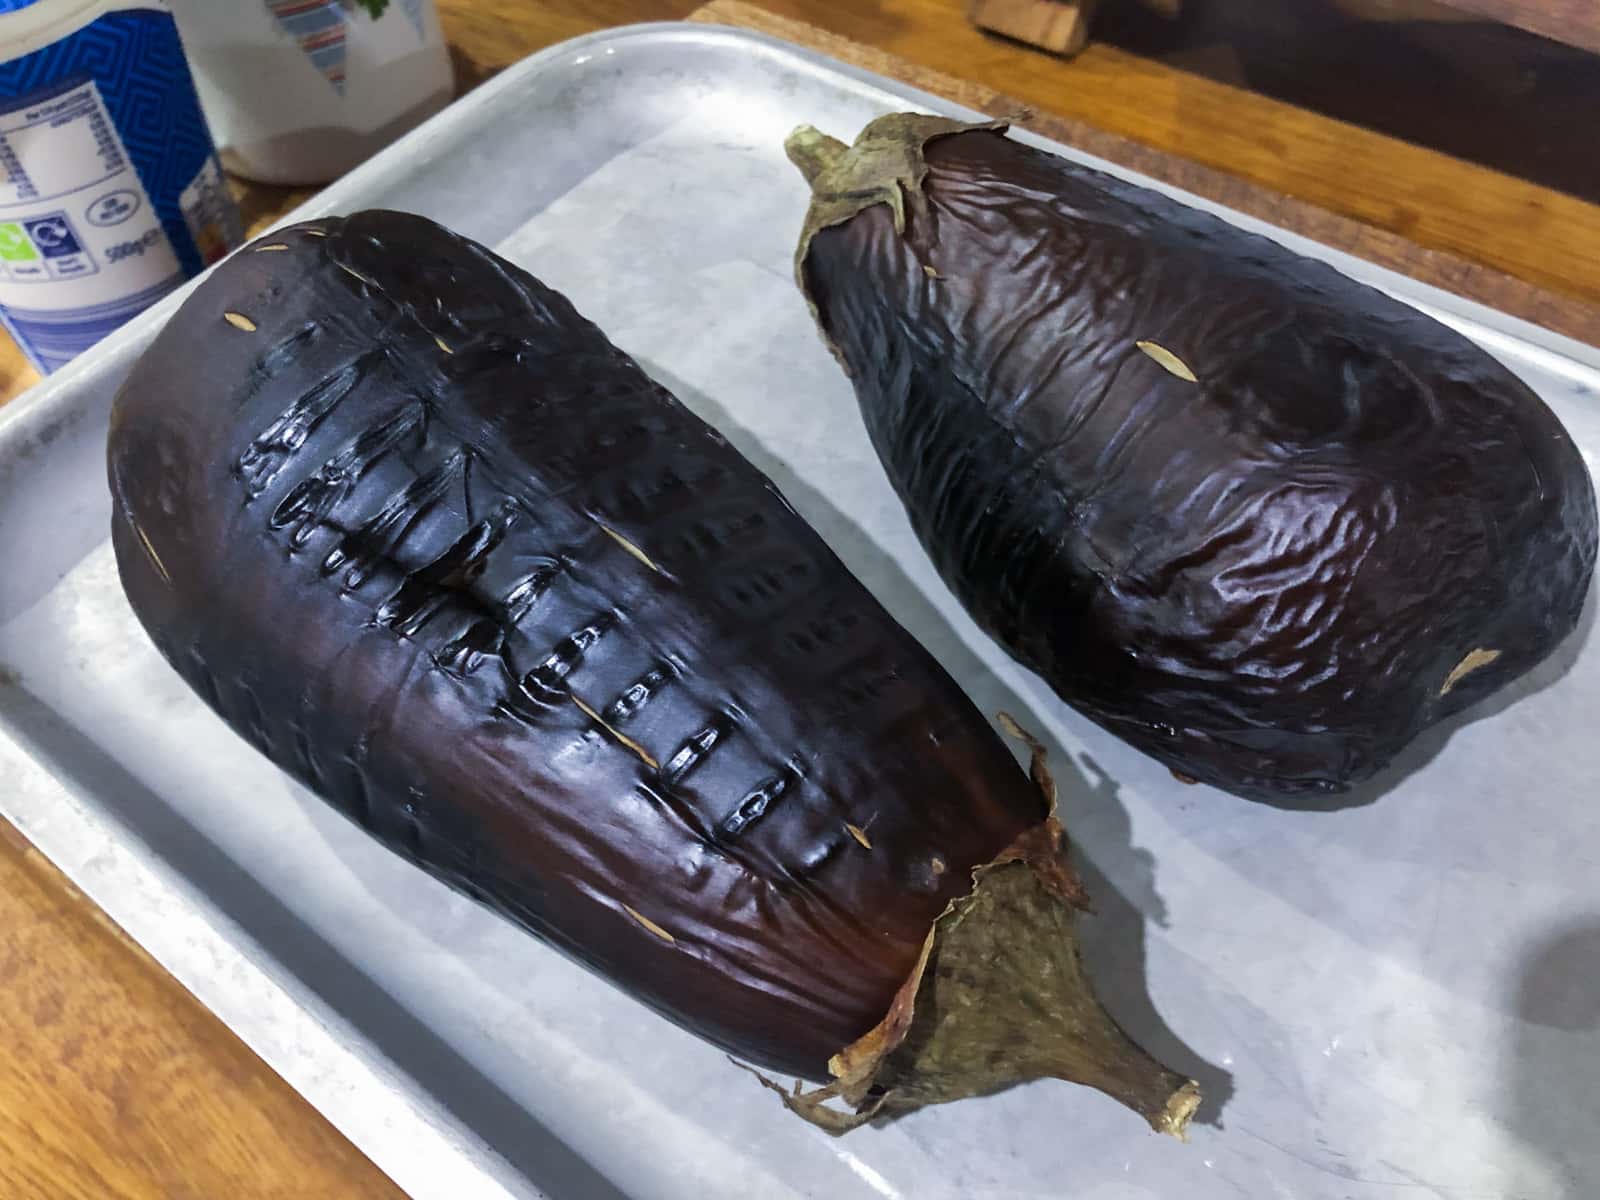 Two large aubergines (eggplants) pierced with a knife and baked on a baking sheet.